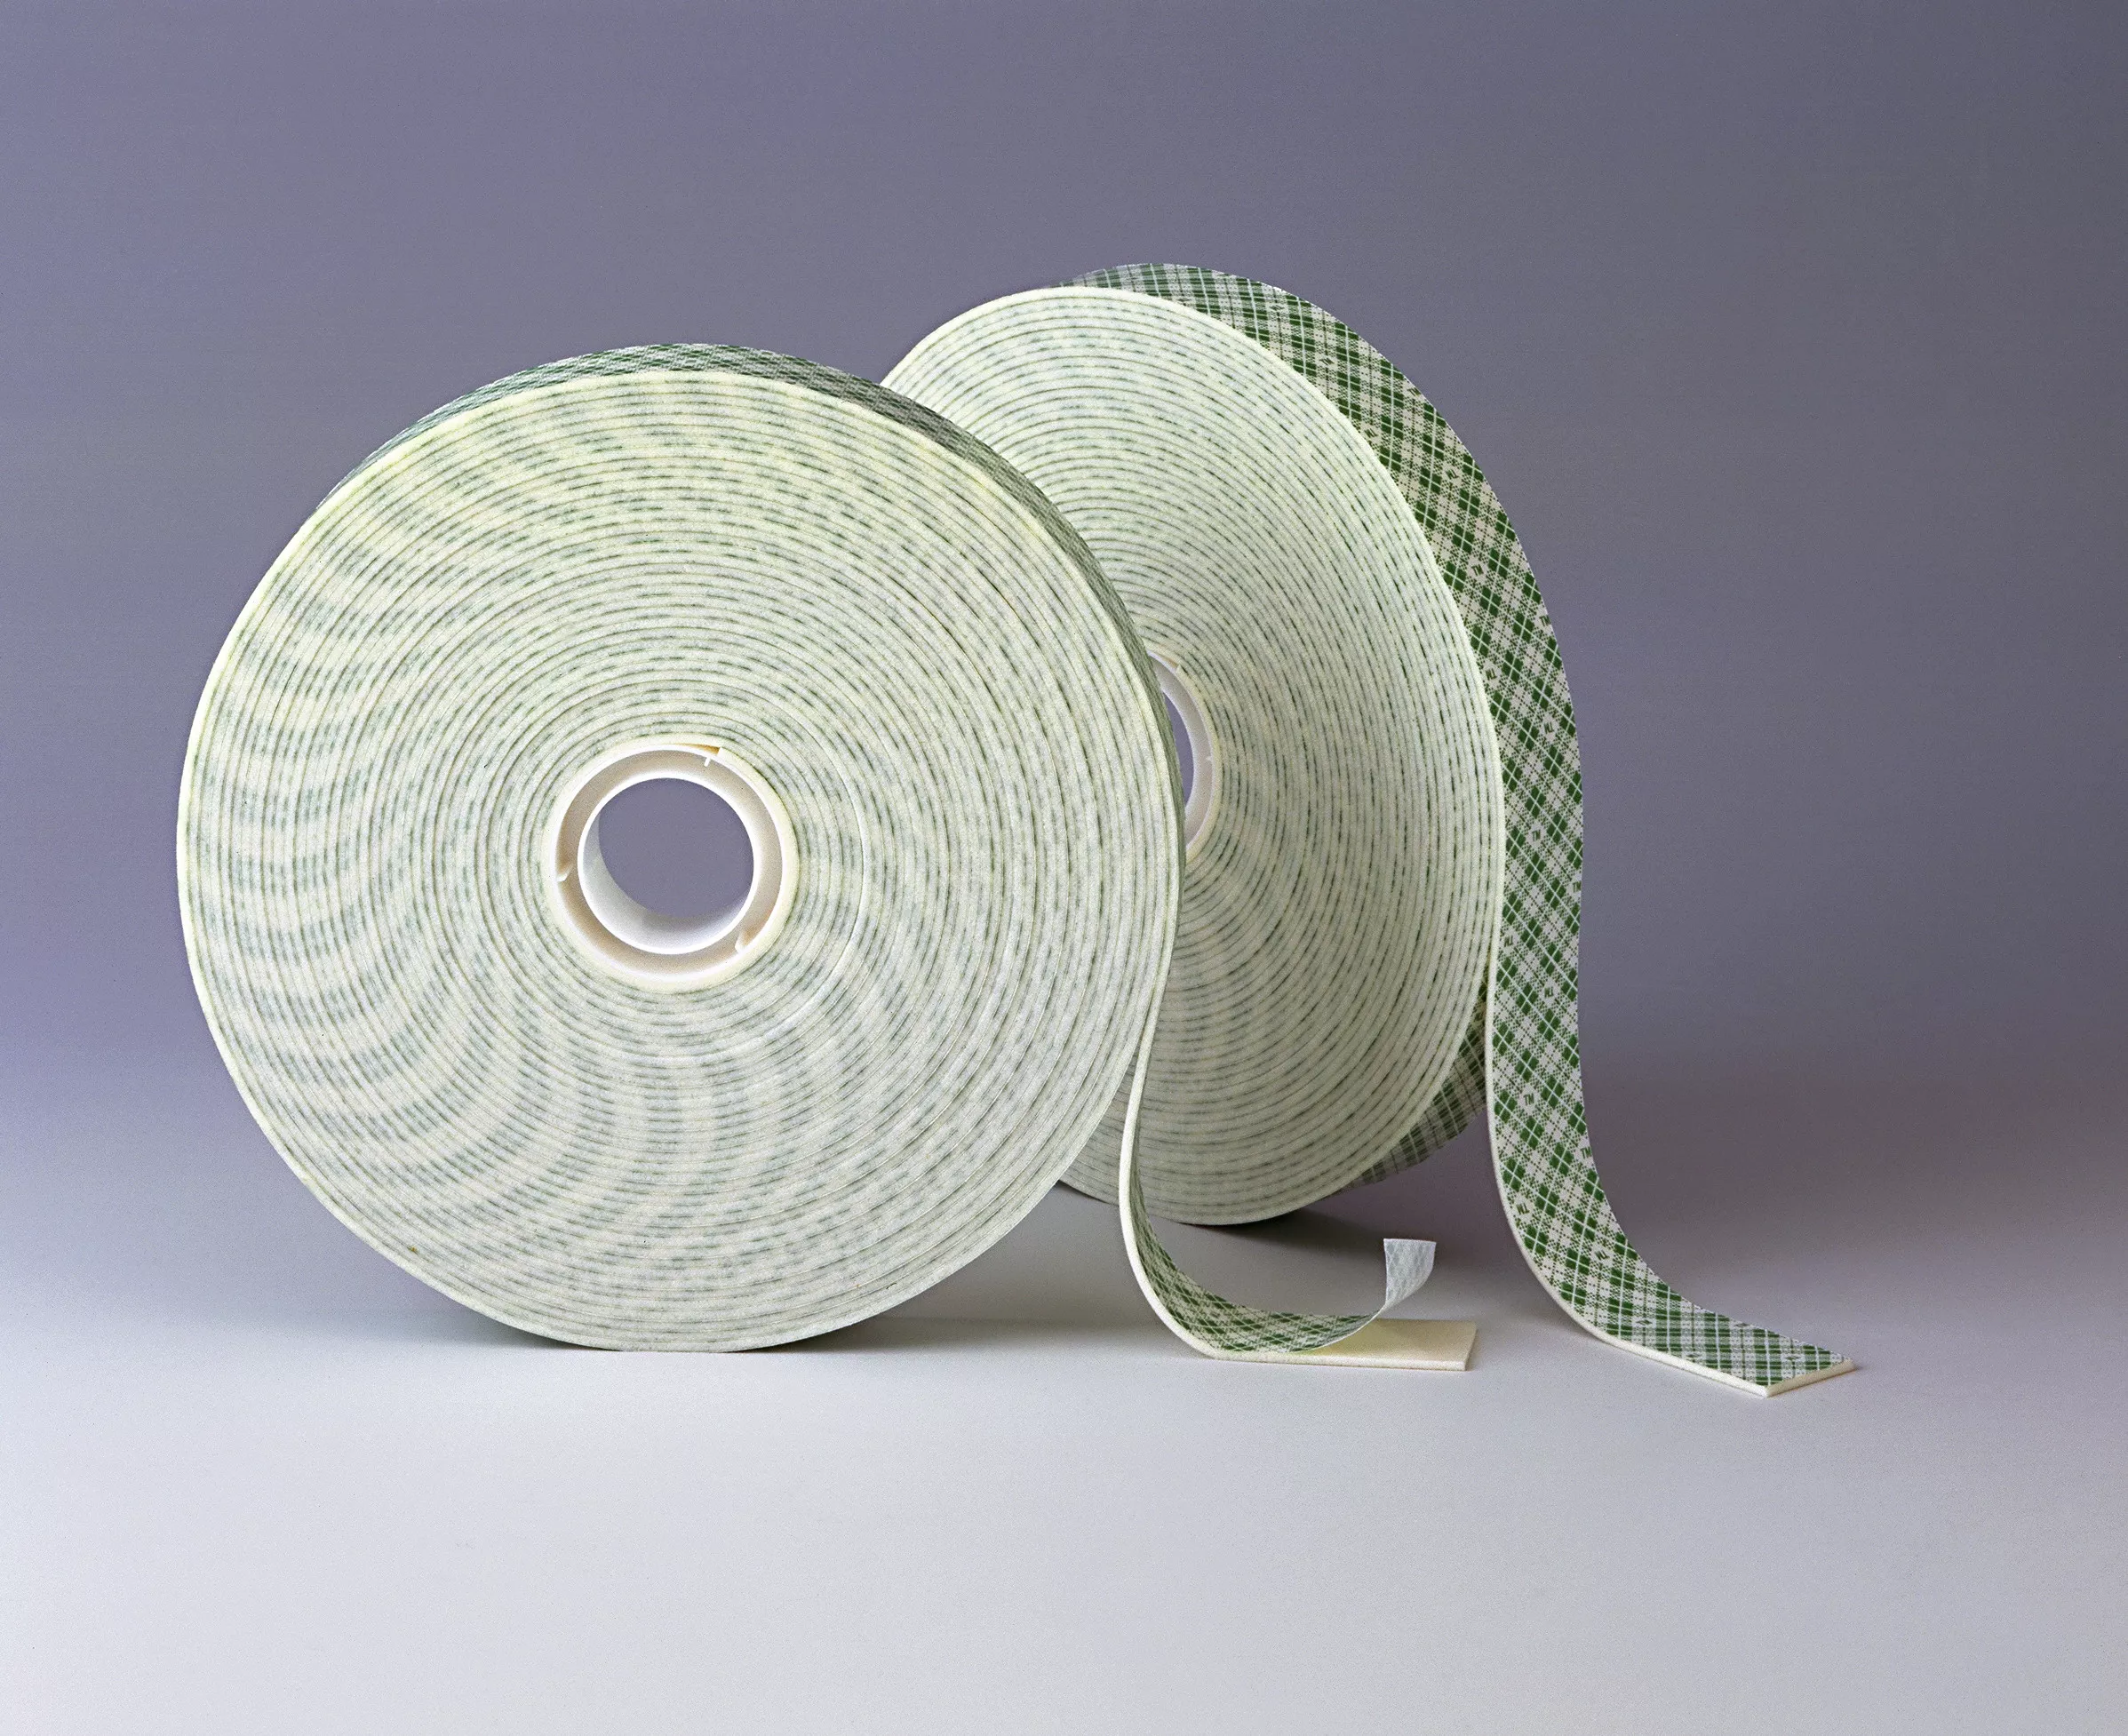 3M™ Double Coated Urethane Foam Tape 4026, Natural, 1 in x 36 yd, 62
mil, 9 Rolls/Case